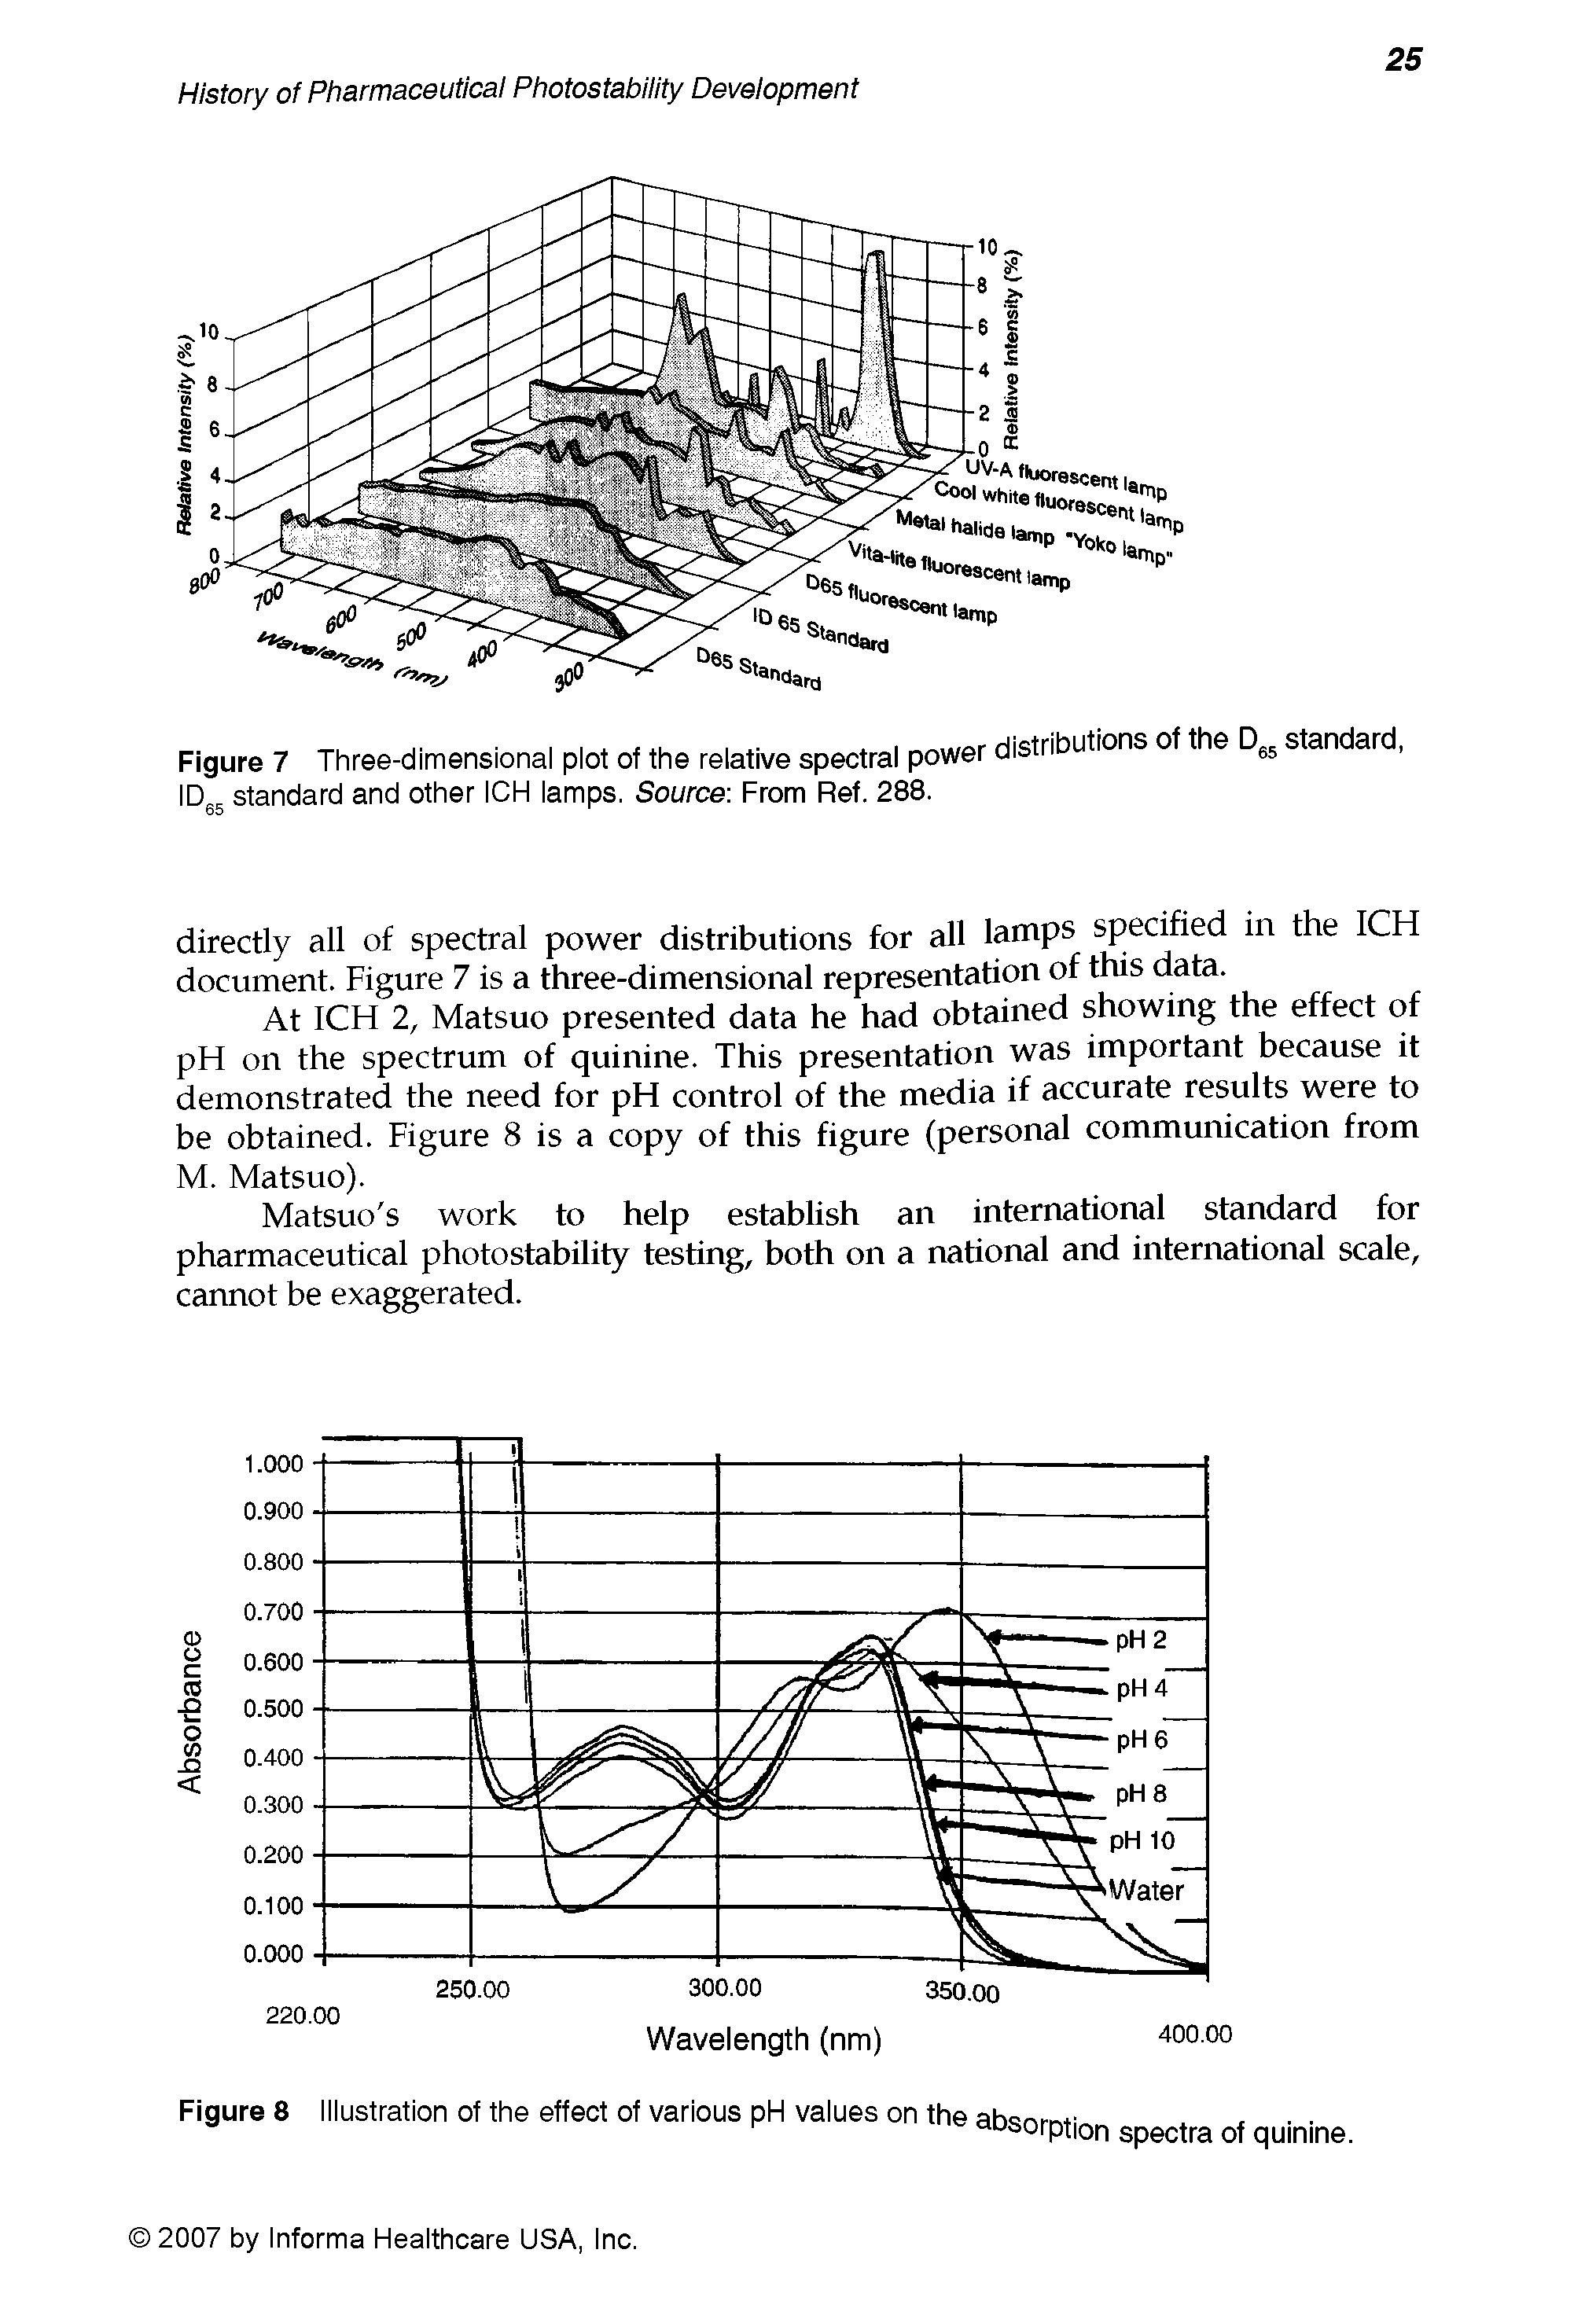 Figure 7 Three-dimensional plot of the relative spectral power distributions of the standard, ID, standard and other ICH lamps. Source-. From Ref. 288.